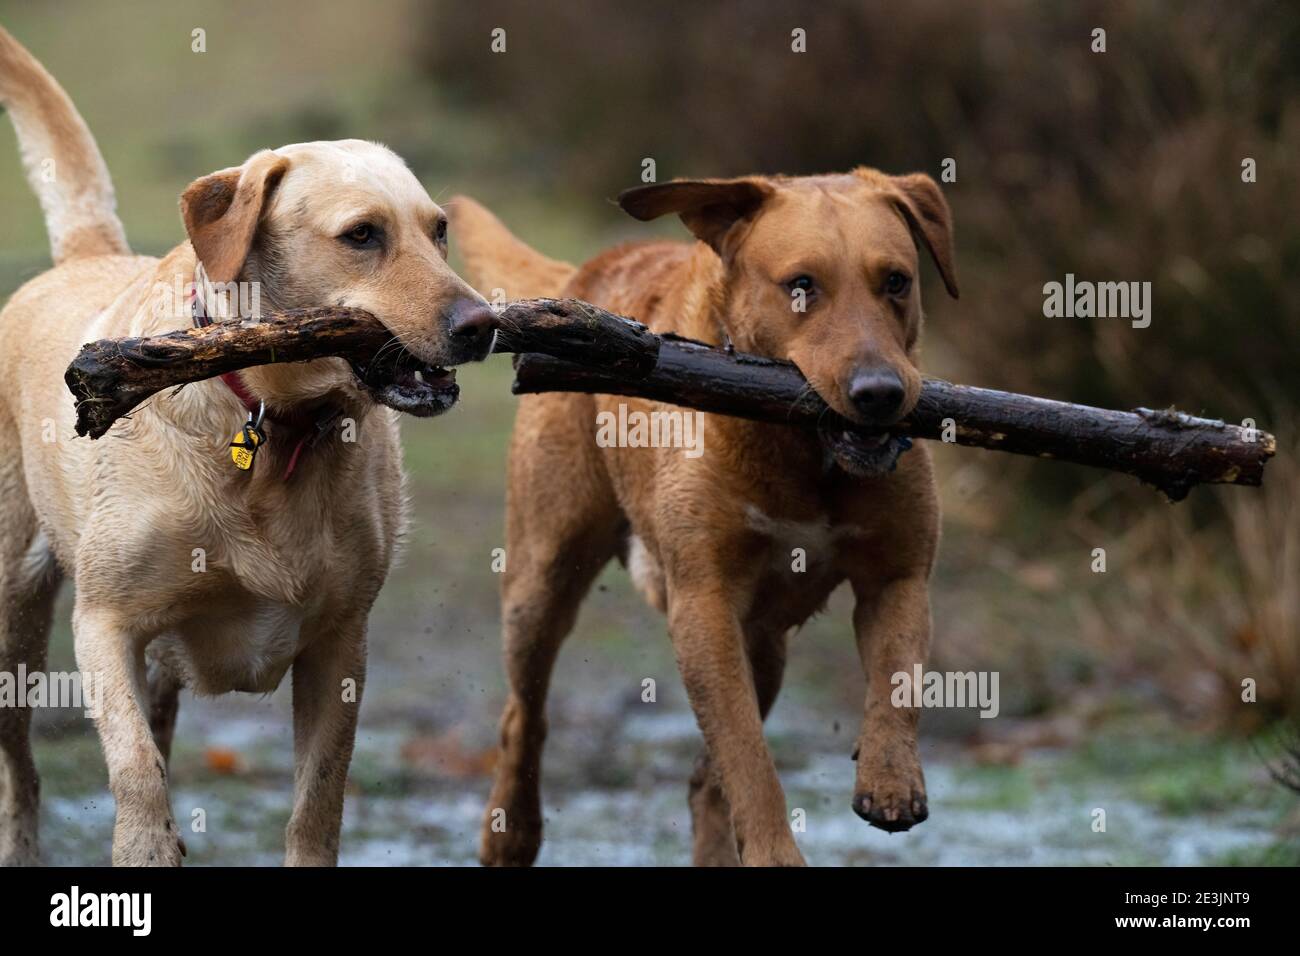 A pair of Labrador Retriever Dogs-Canis familiaris playing. Stock Photo